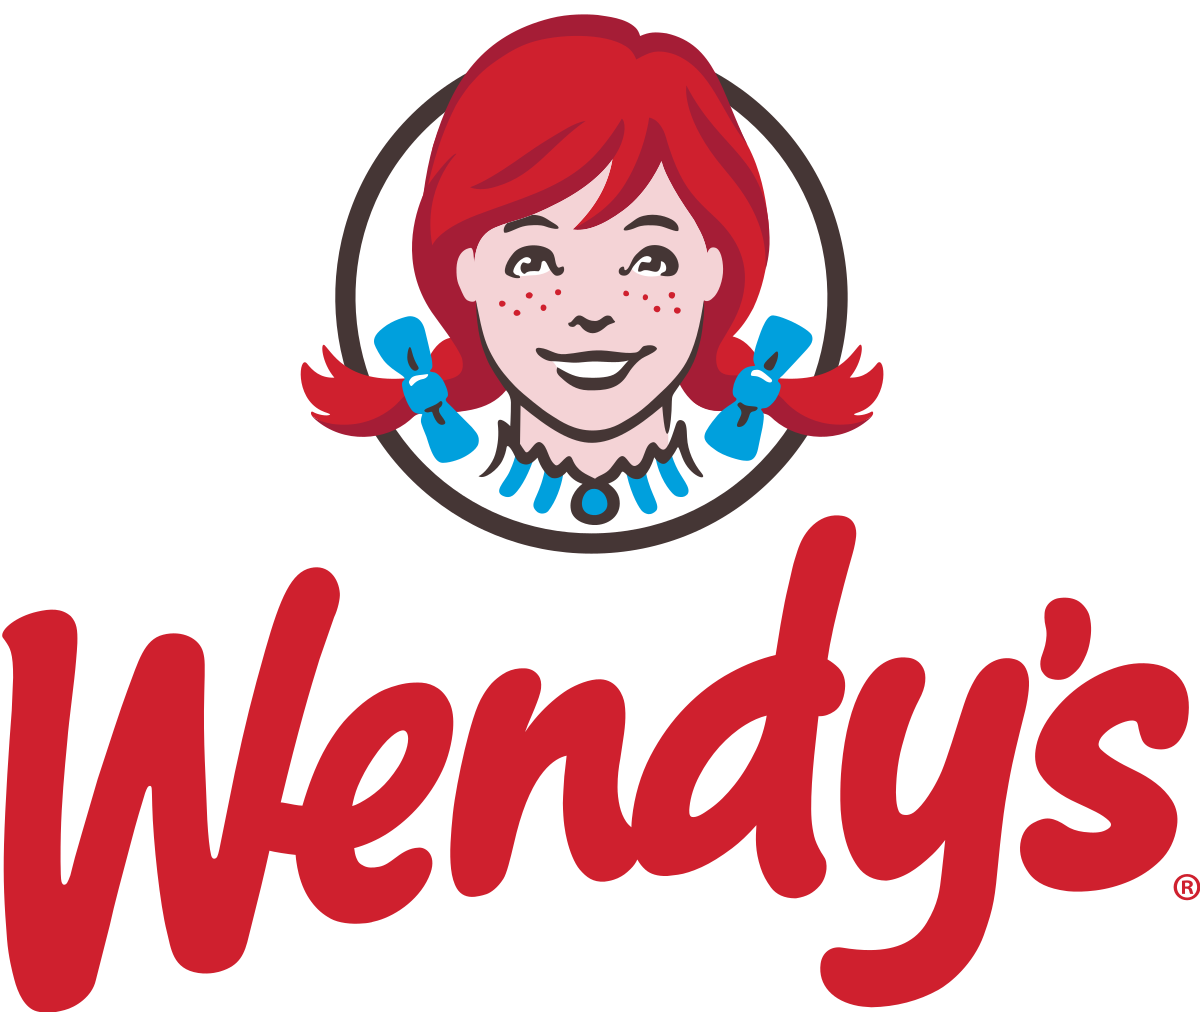 Wendy's Explores Surge Pricing for Menu Items Based on Demand